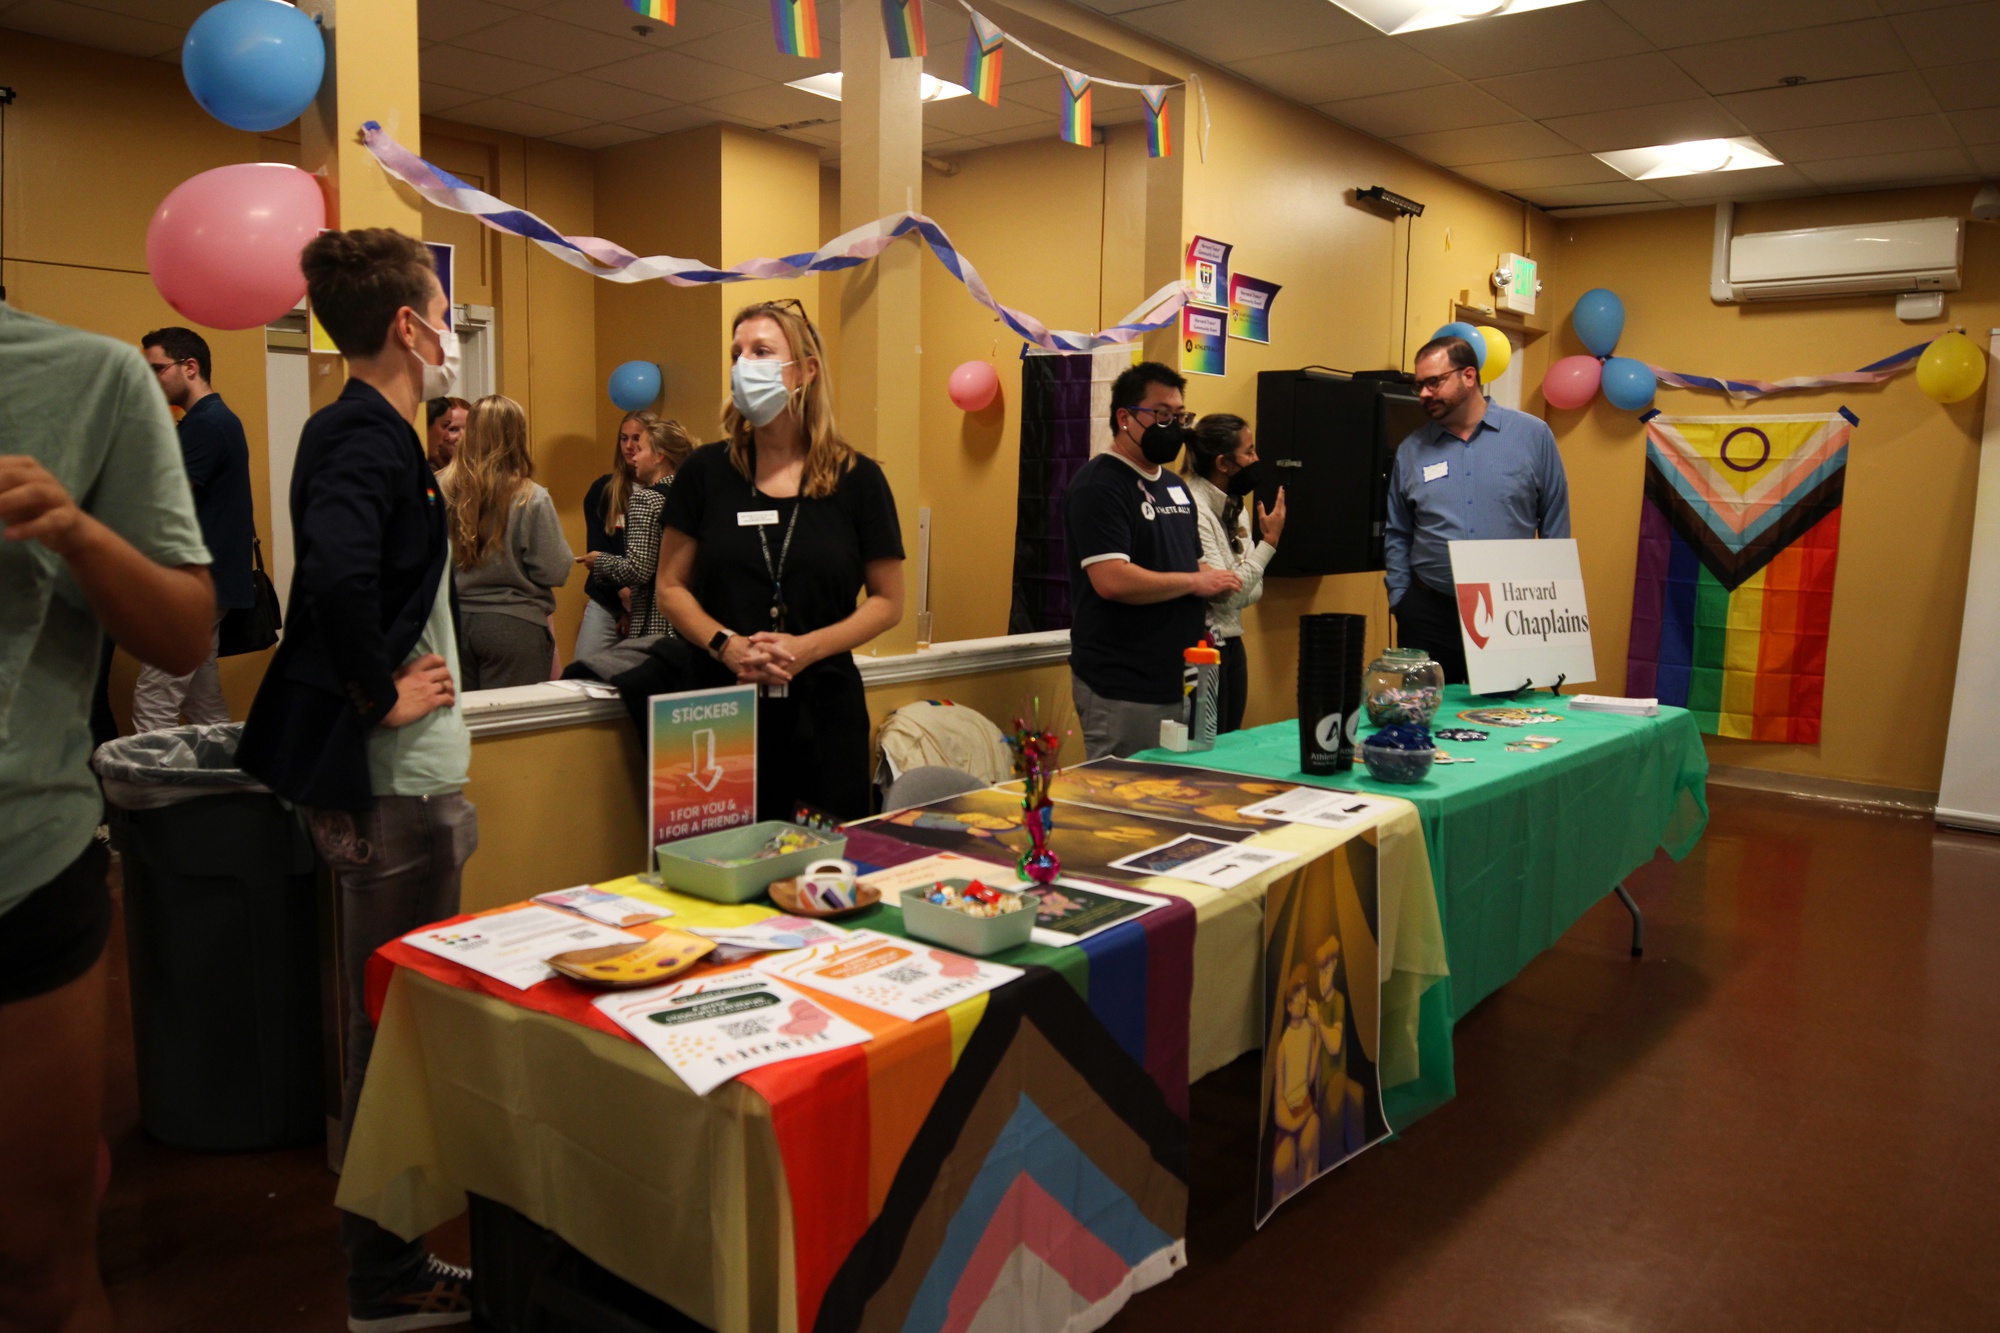 The Trans Community Day event provided a space for trans and gender-nonconforming members of the community, as well as a workshop on allyship for students.